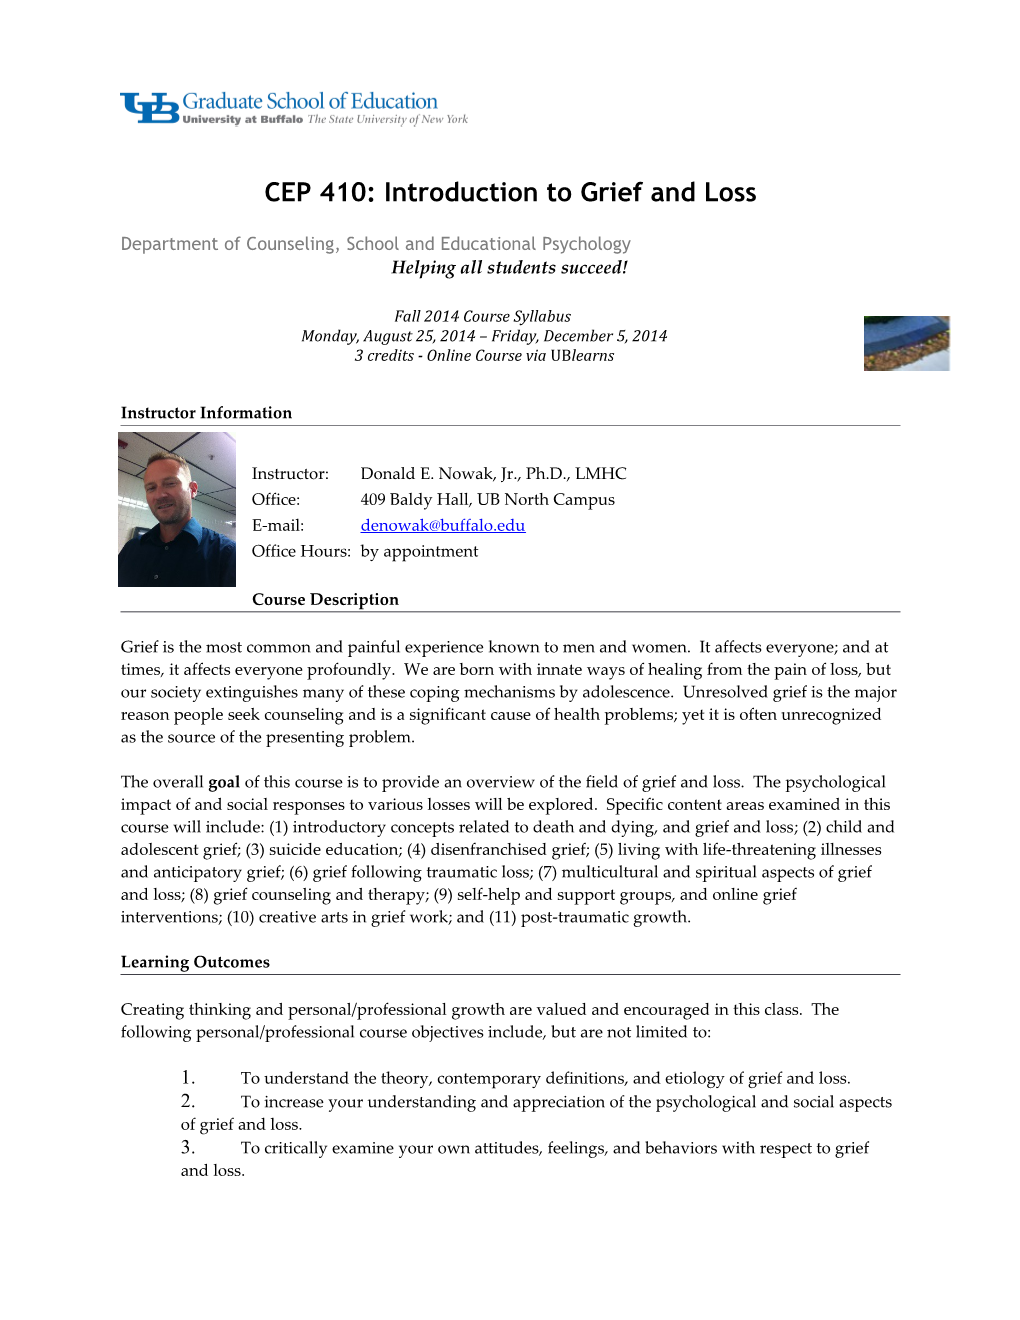 CEP 410: Introduction to Grief and Loss Spring 2014